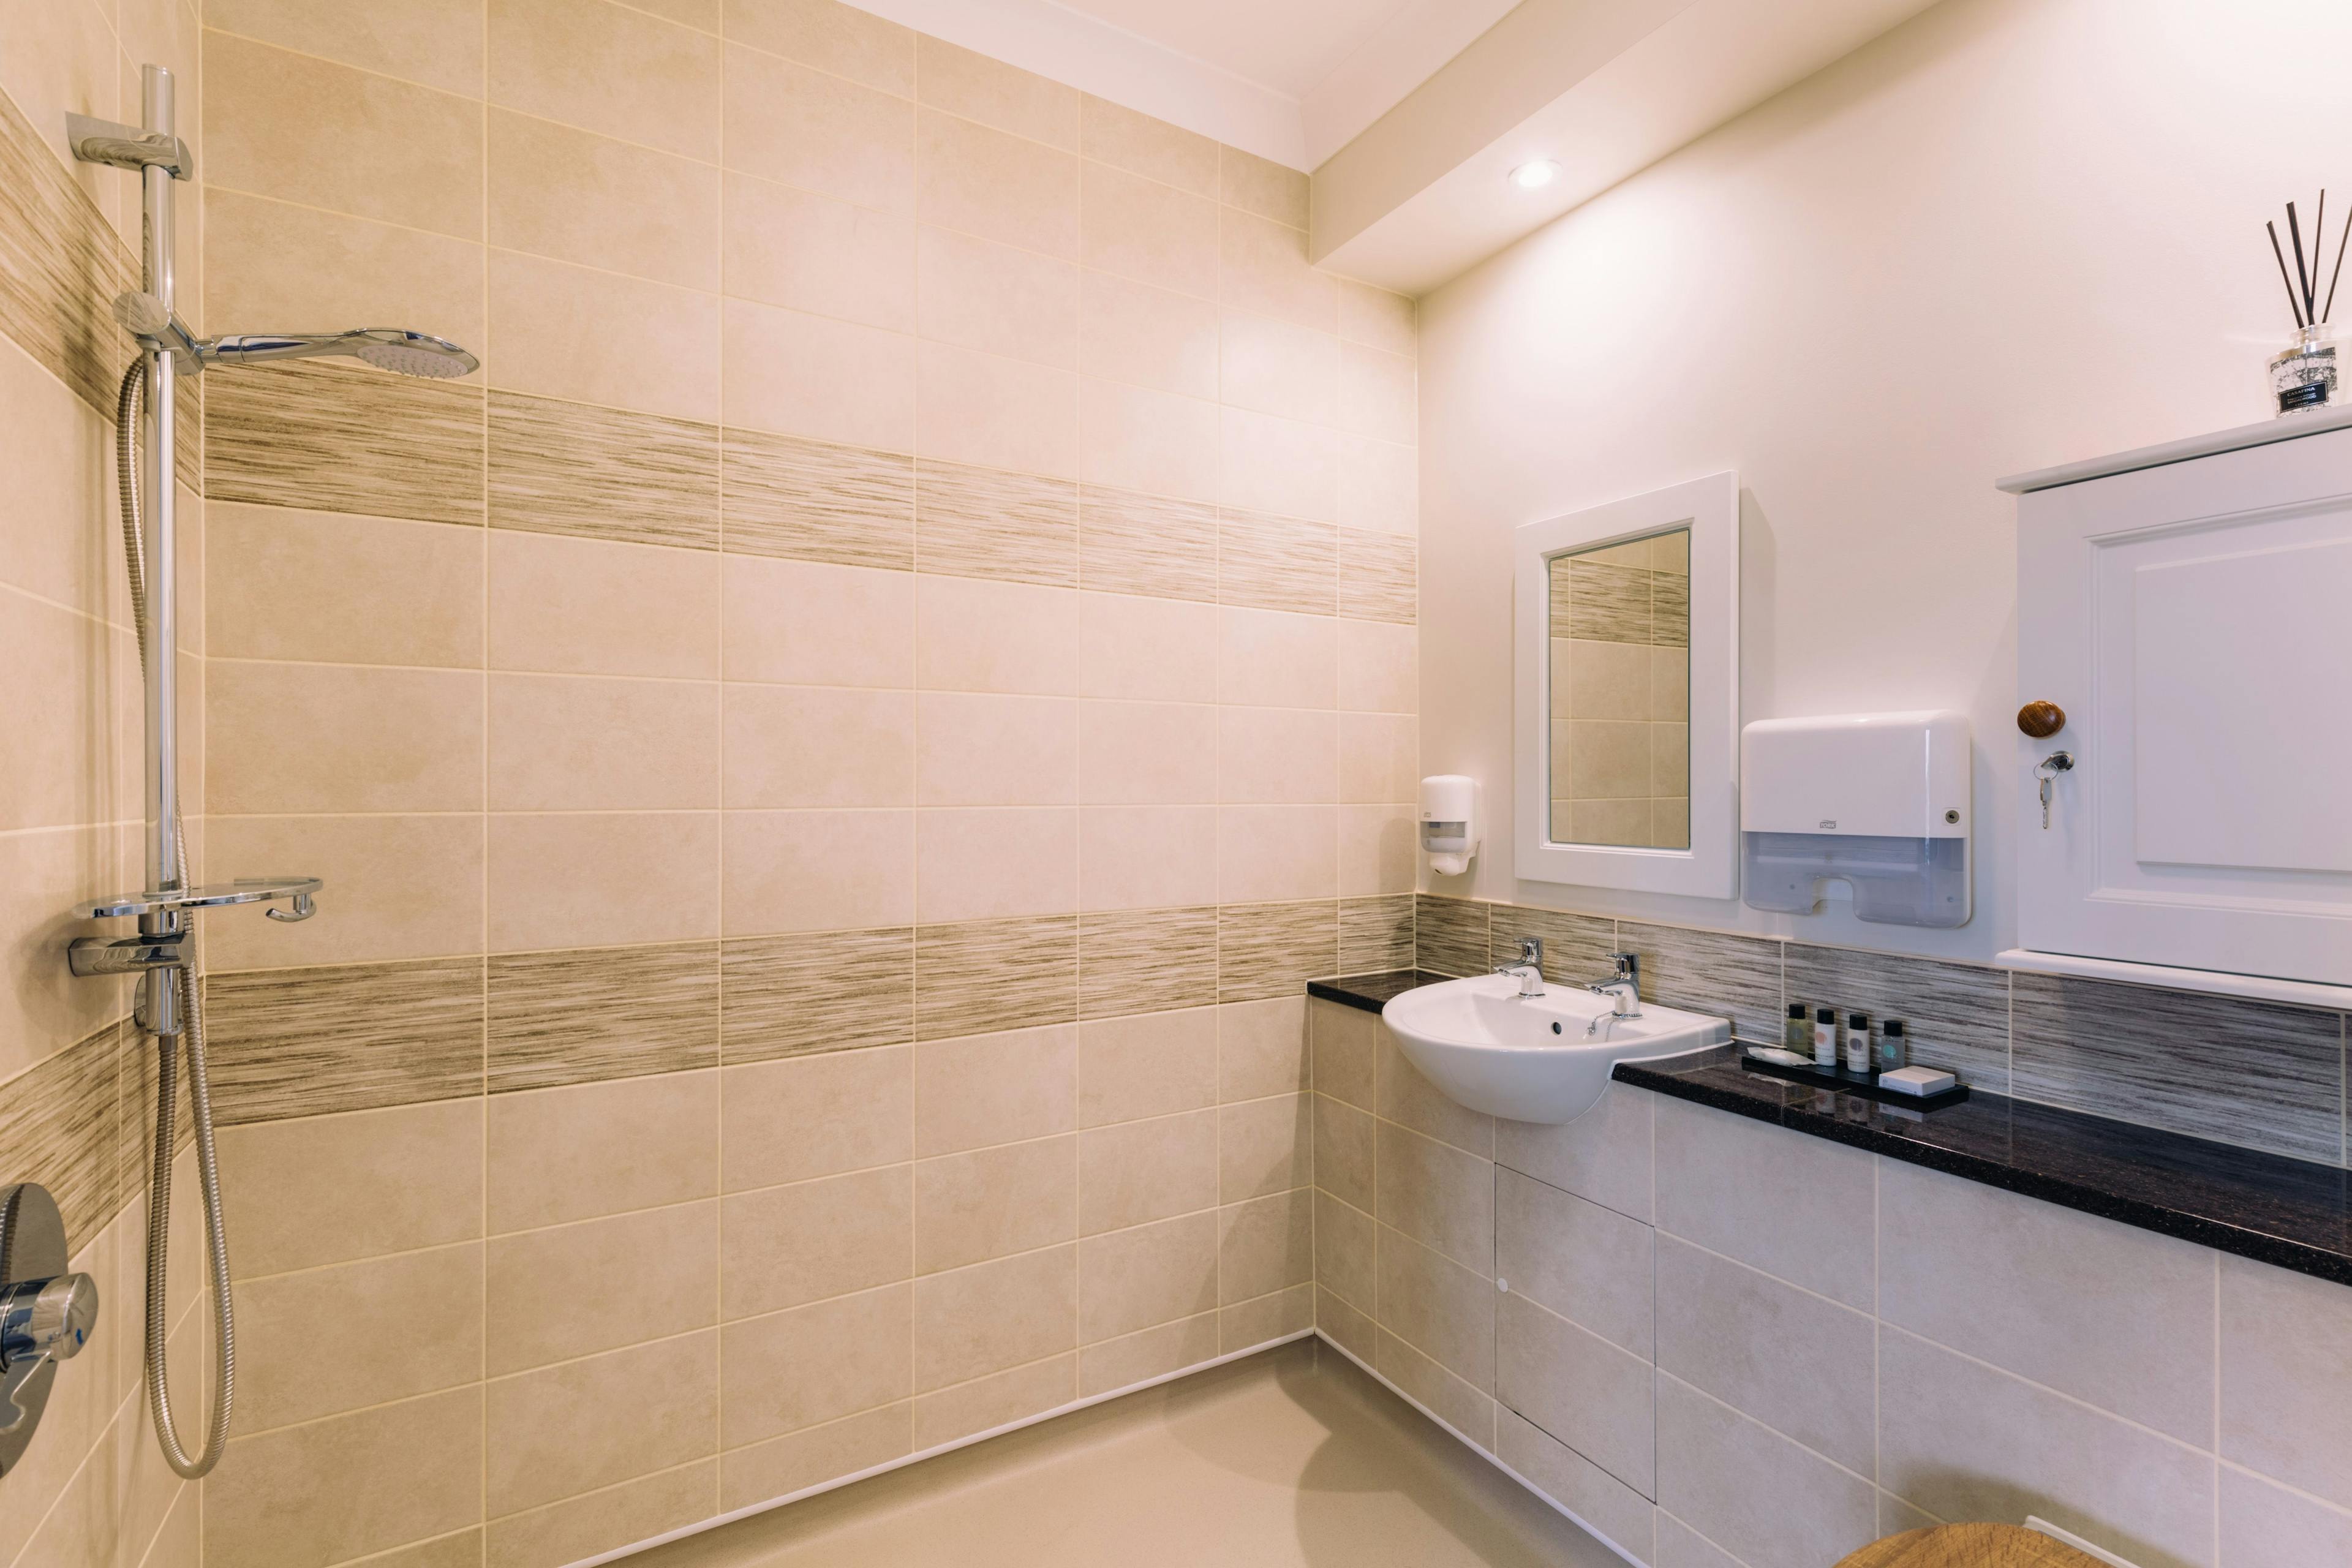 Bathroom at Peony Court Care Home in Croydon, Greater London